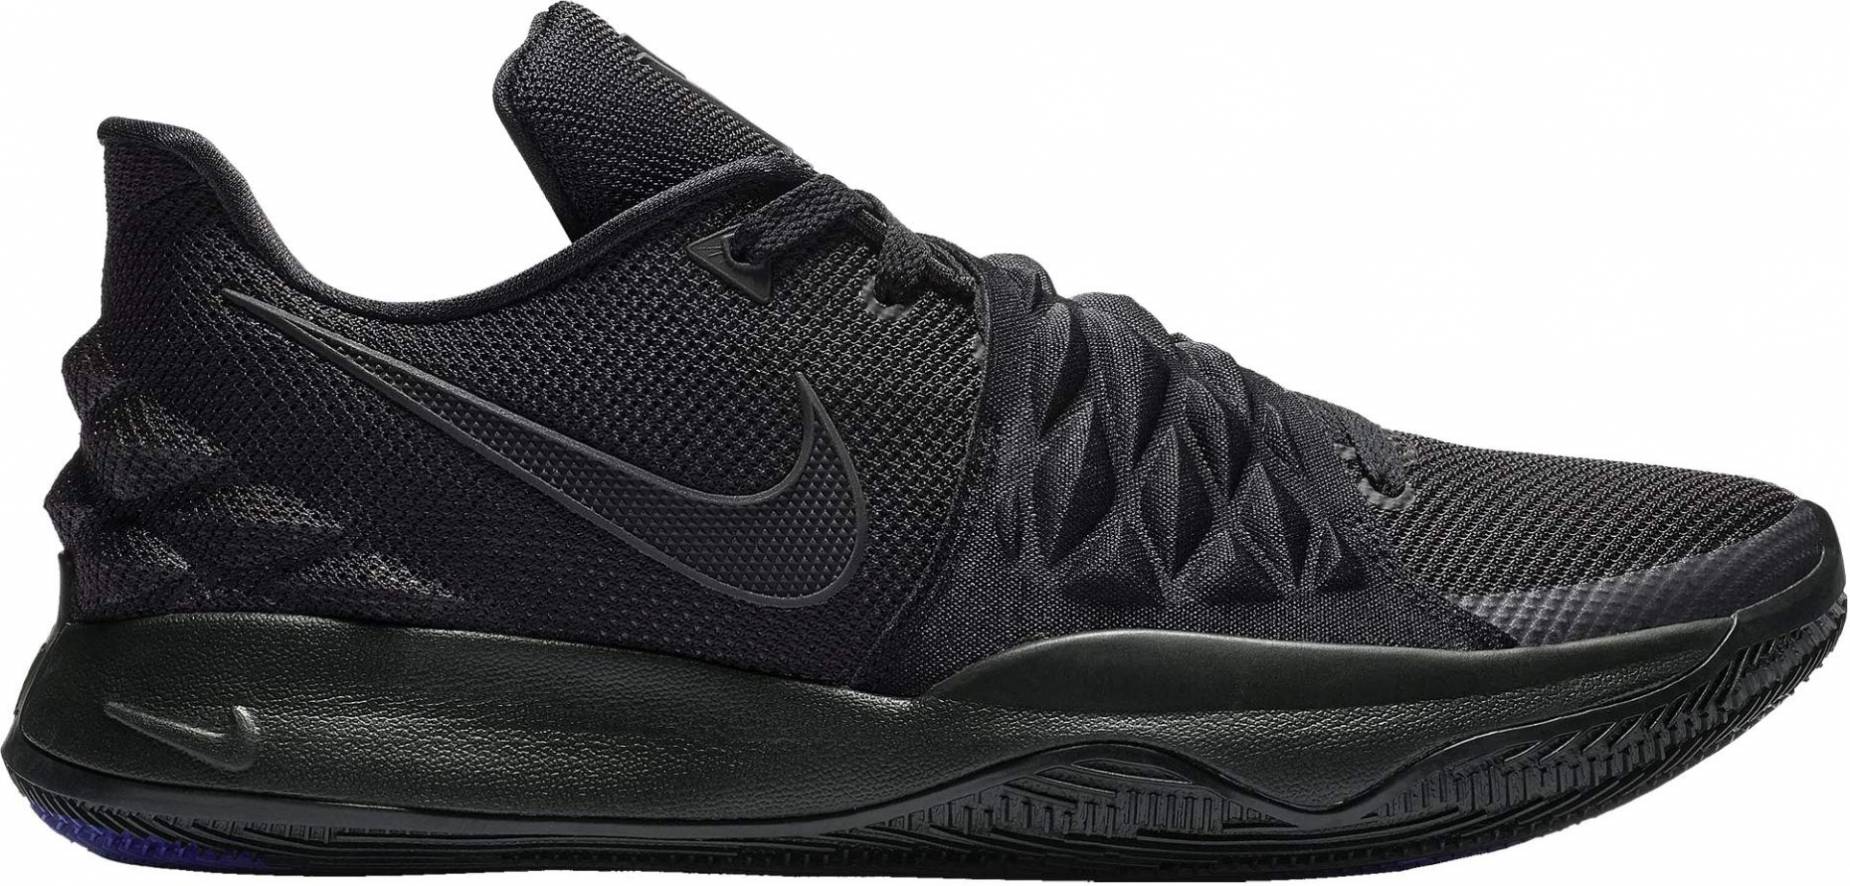 kyrie low basketball shoes